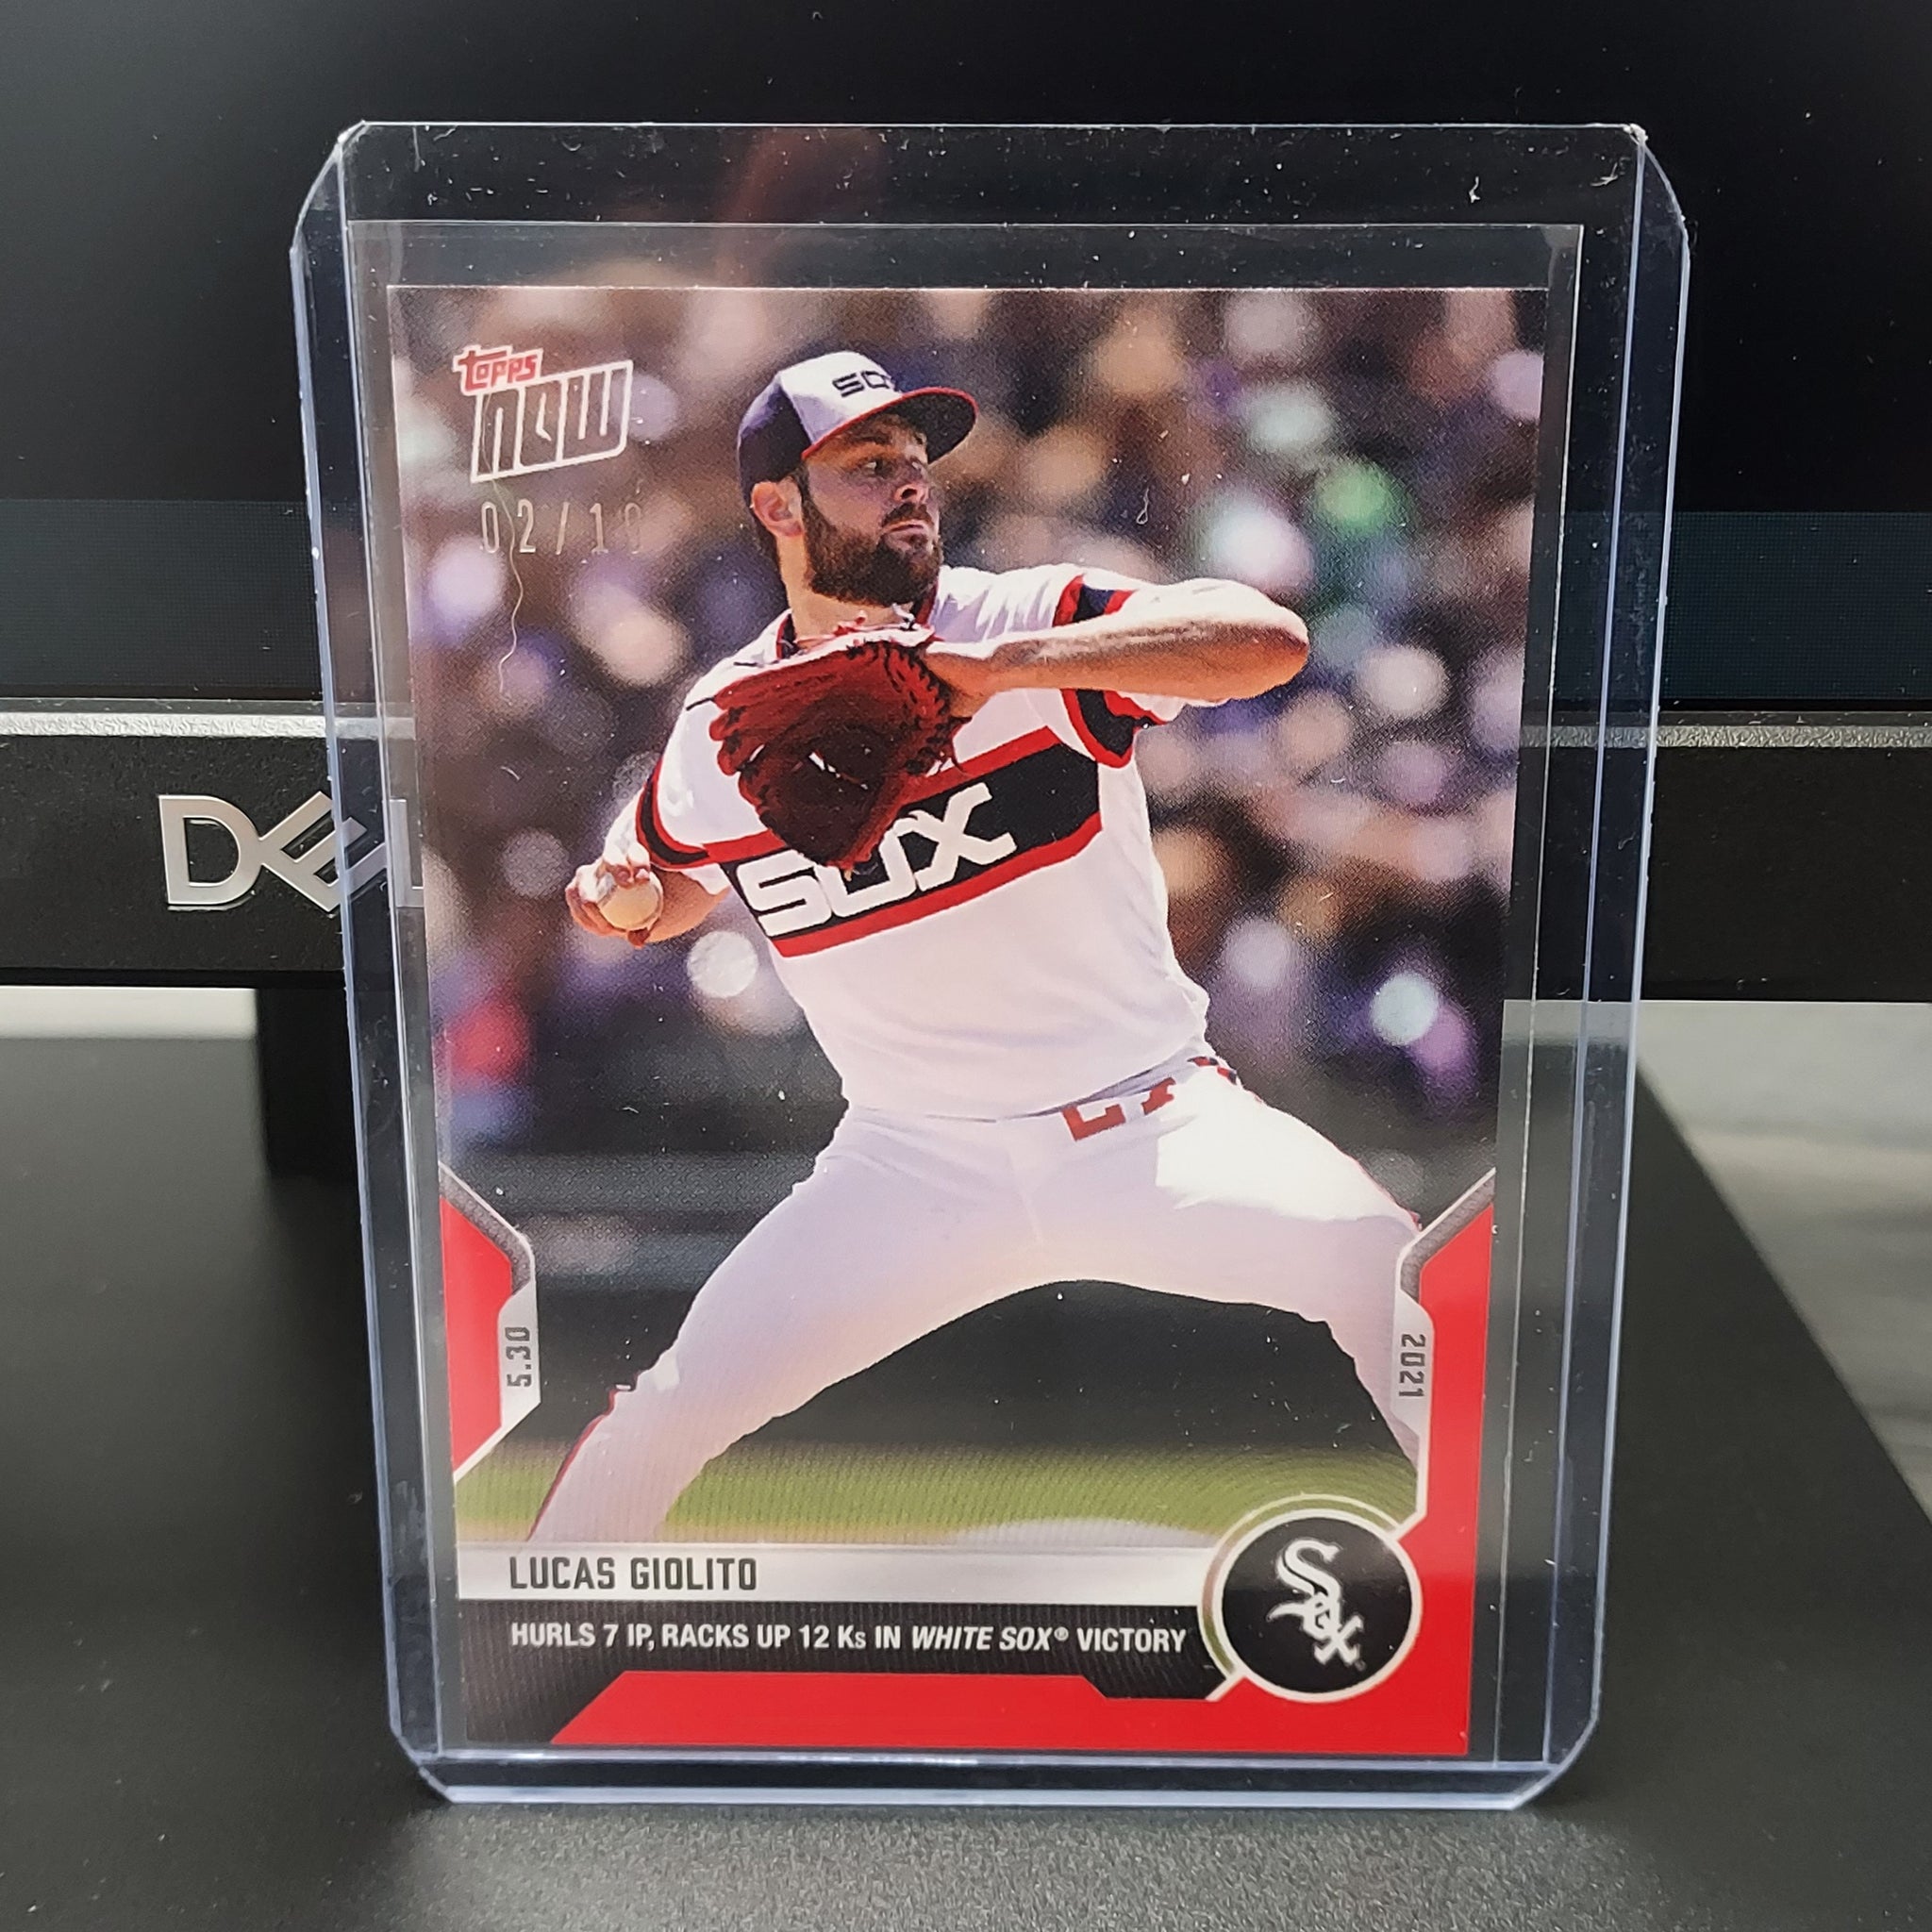 Lucas Giolito 7 IP, 12 K's, W - 2021 MLB TOPPS NOW Card 288- Red Parallel #2/10